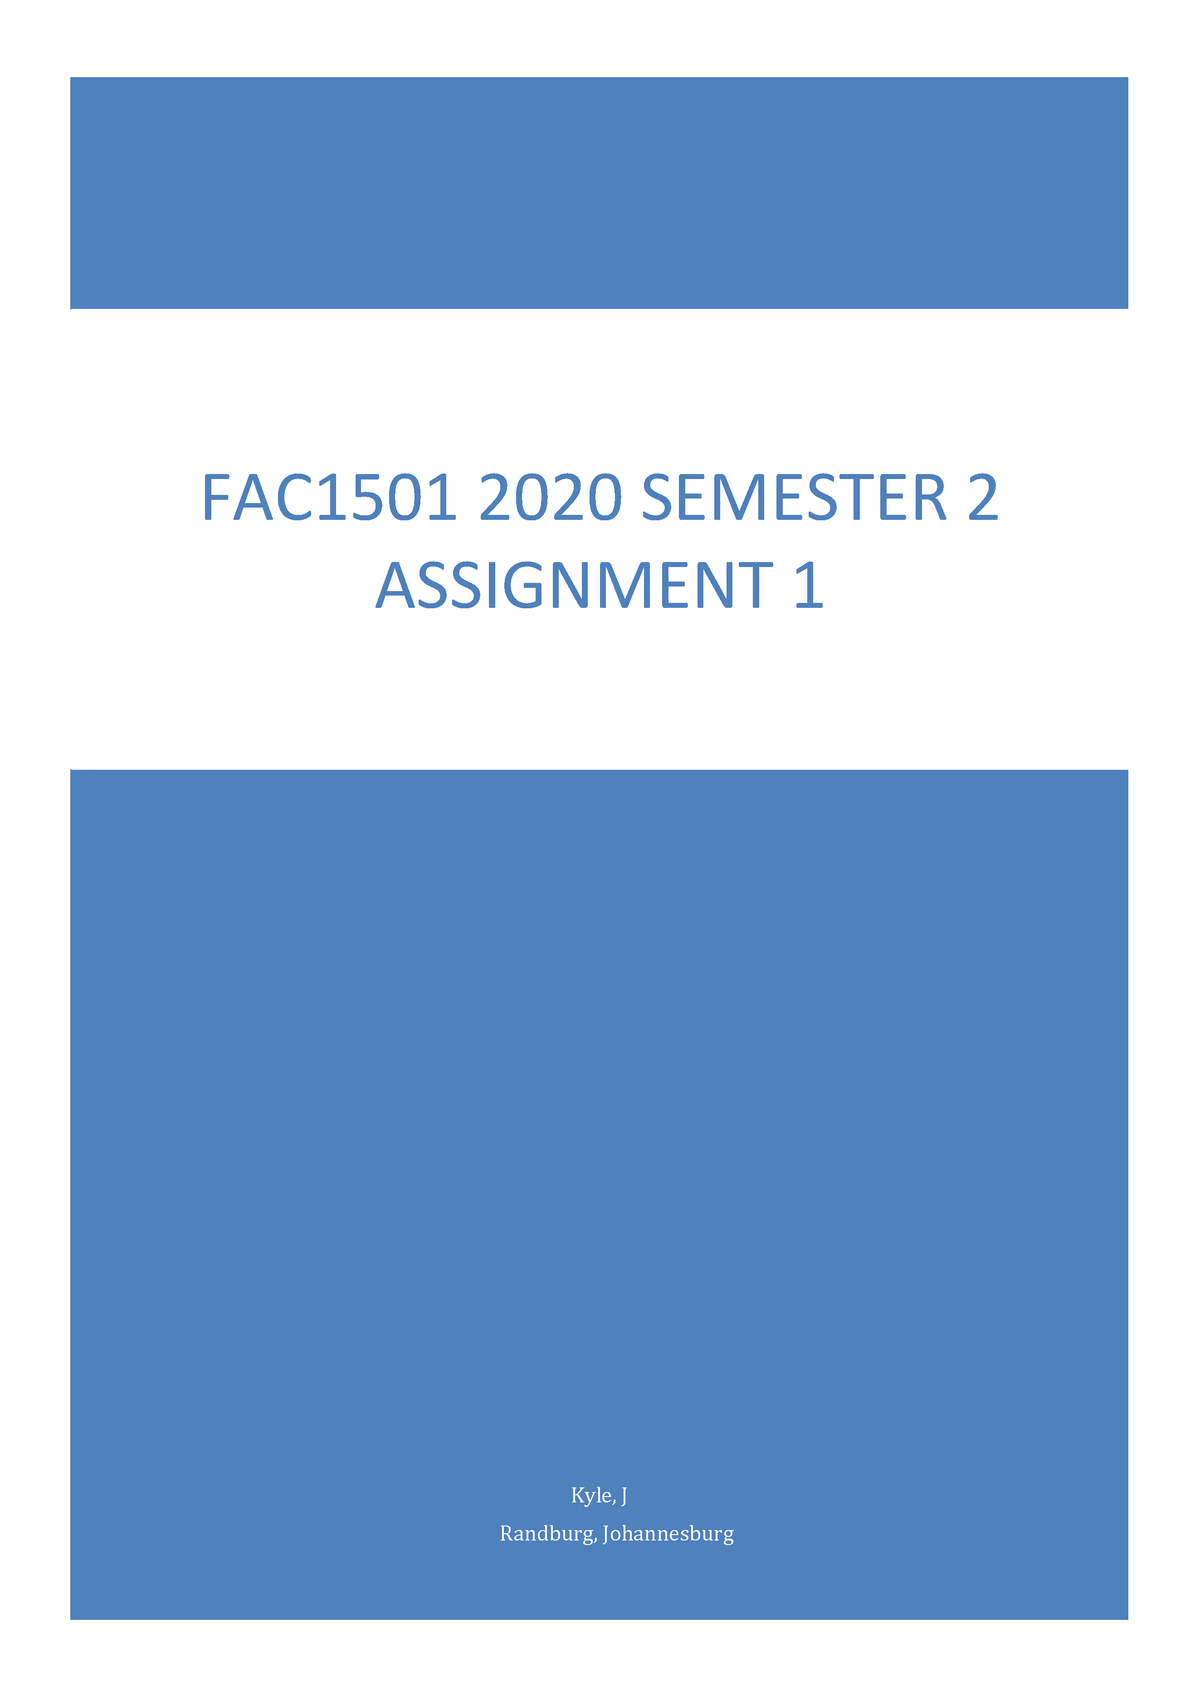 fac1501 assignment 5 answers 2021